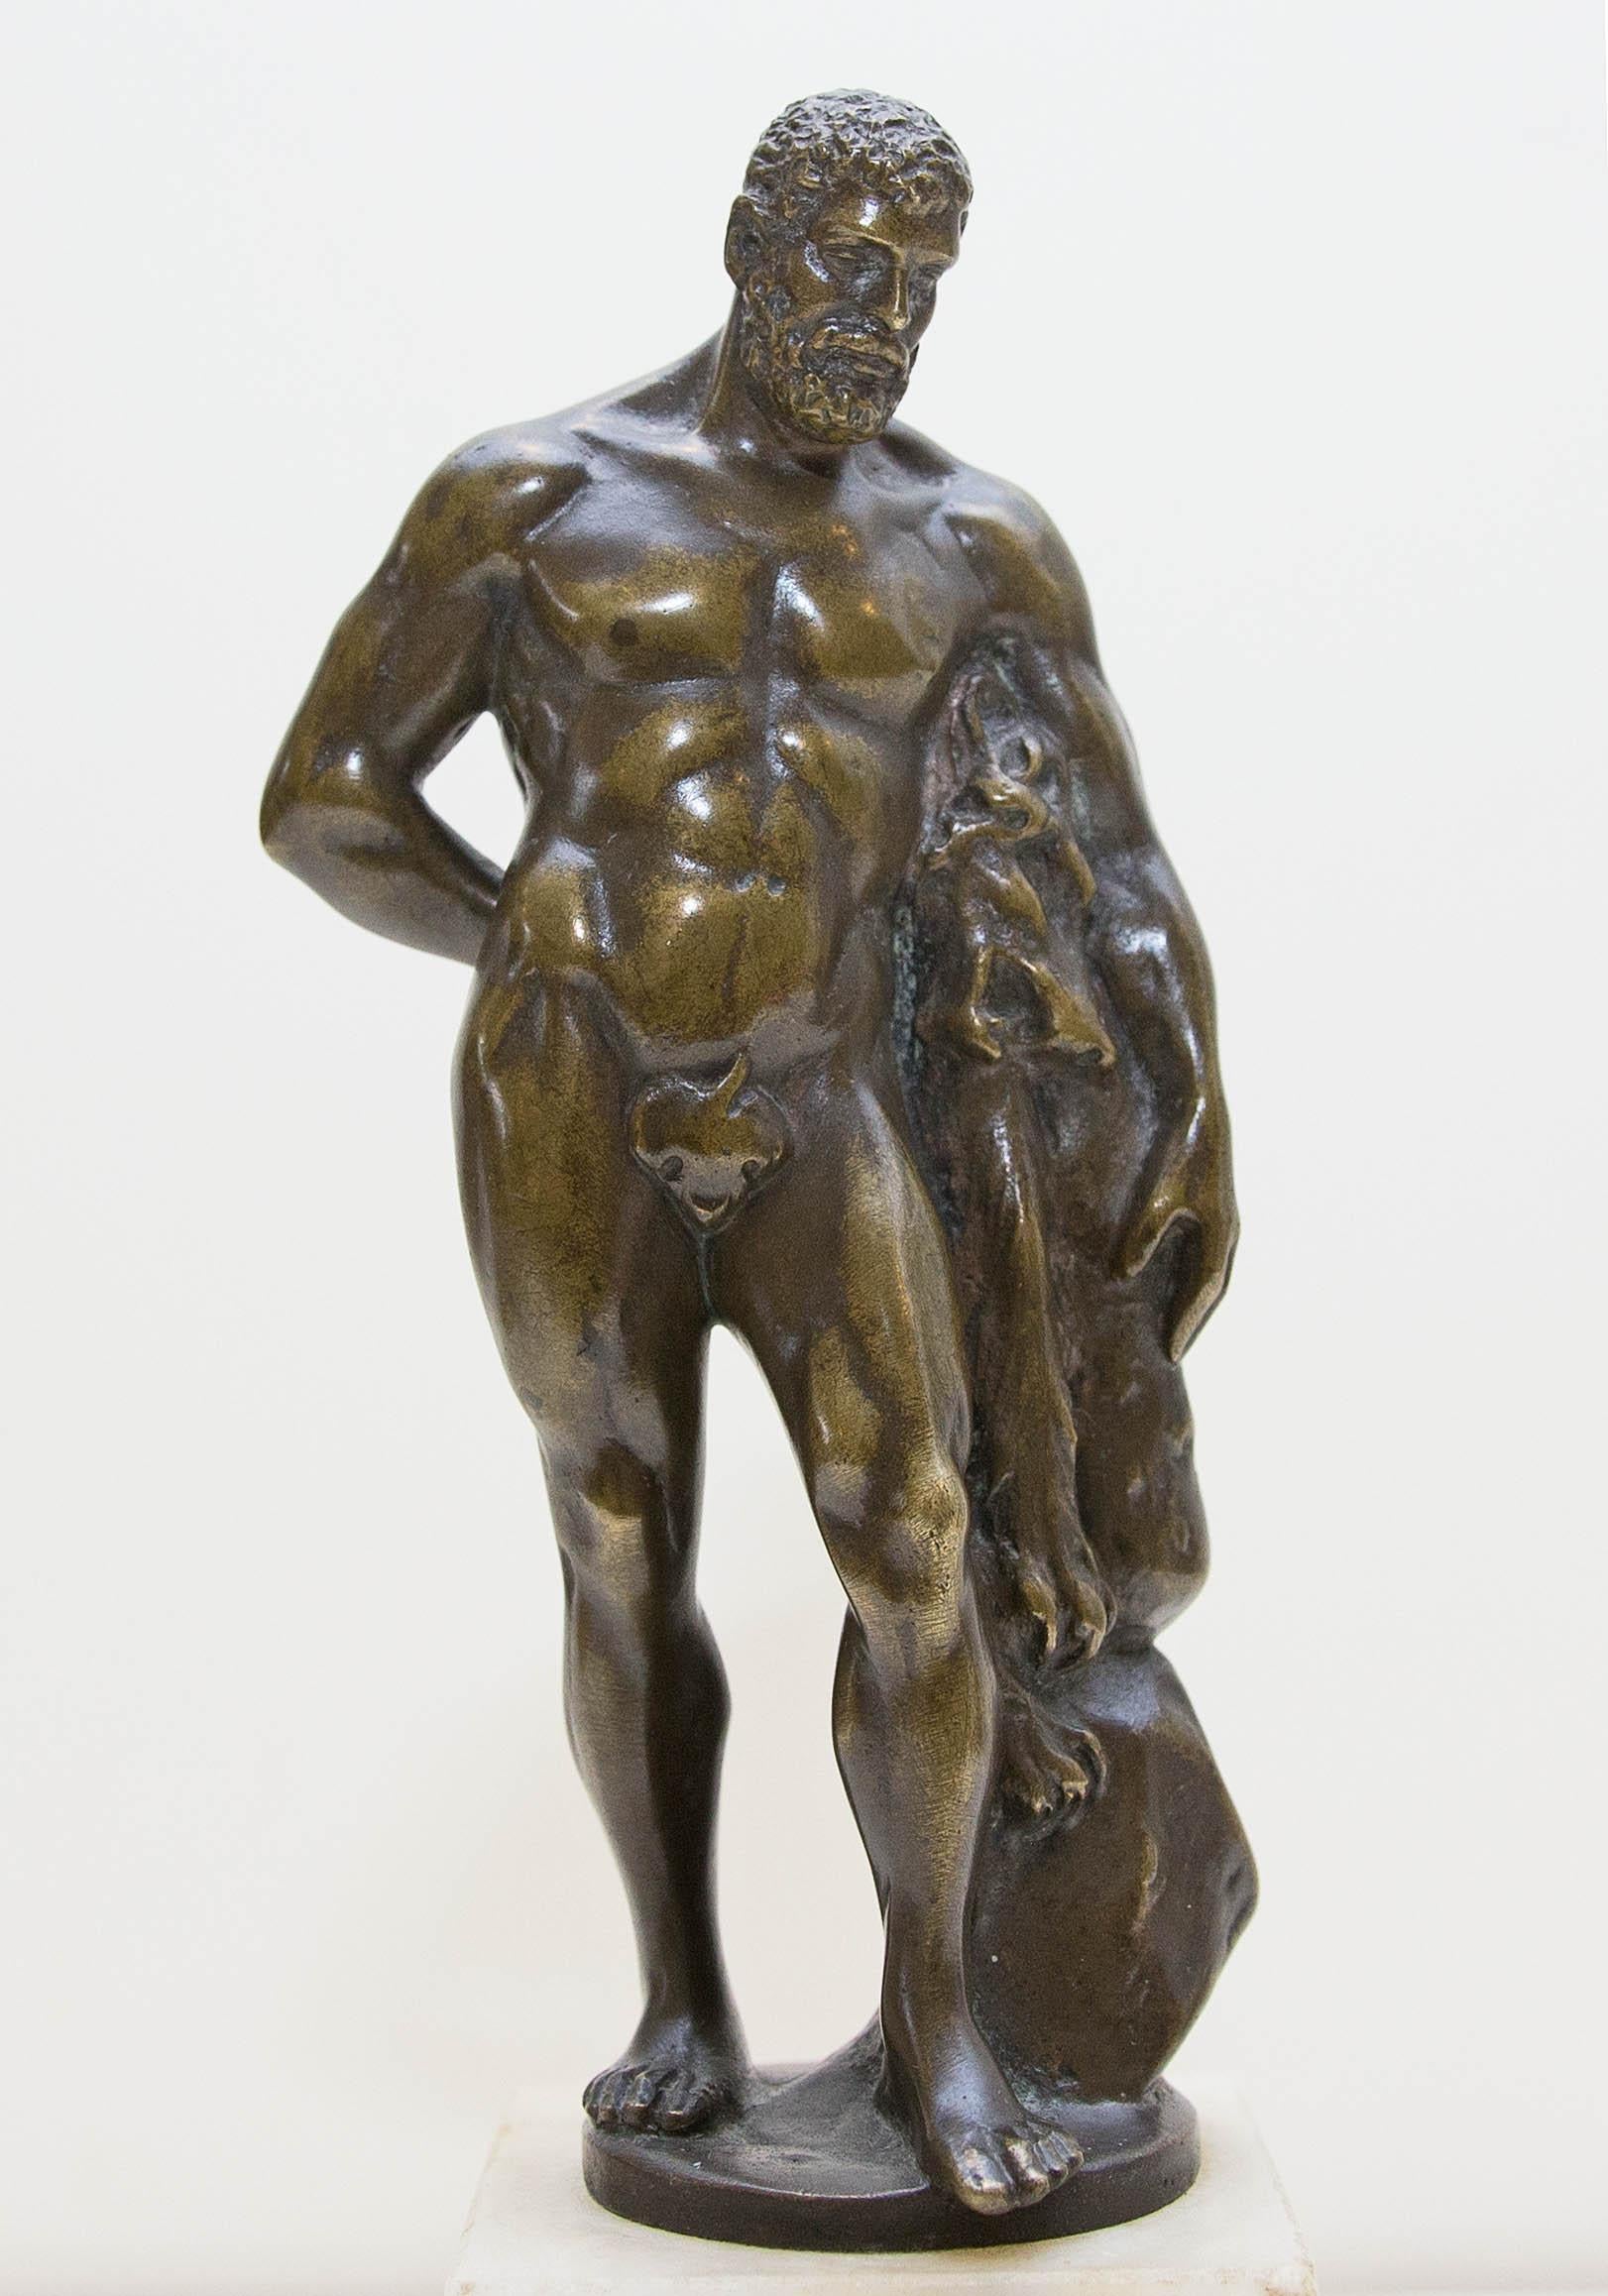 Austrian bronze figure after the Farnese Hercules. Signed C. Brehmer. On a marble base. Appears to have been presented as an award. Plaque reads 